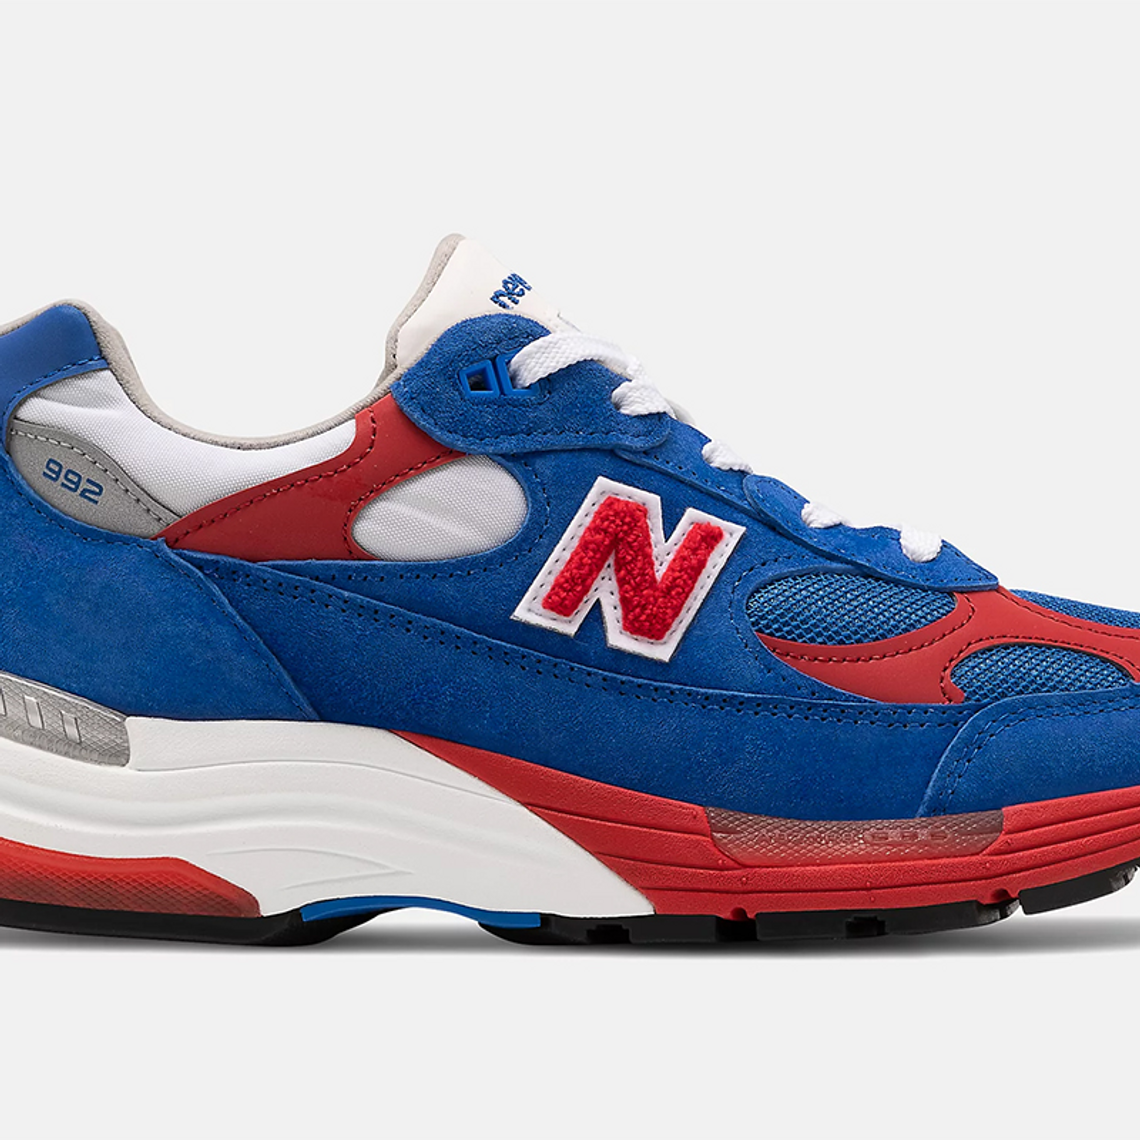 cuidadosamente munición Día New Balance Dress Up the 992 in Red, White and Blue - Sneaker Freaker